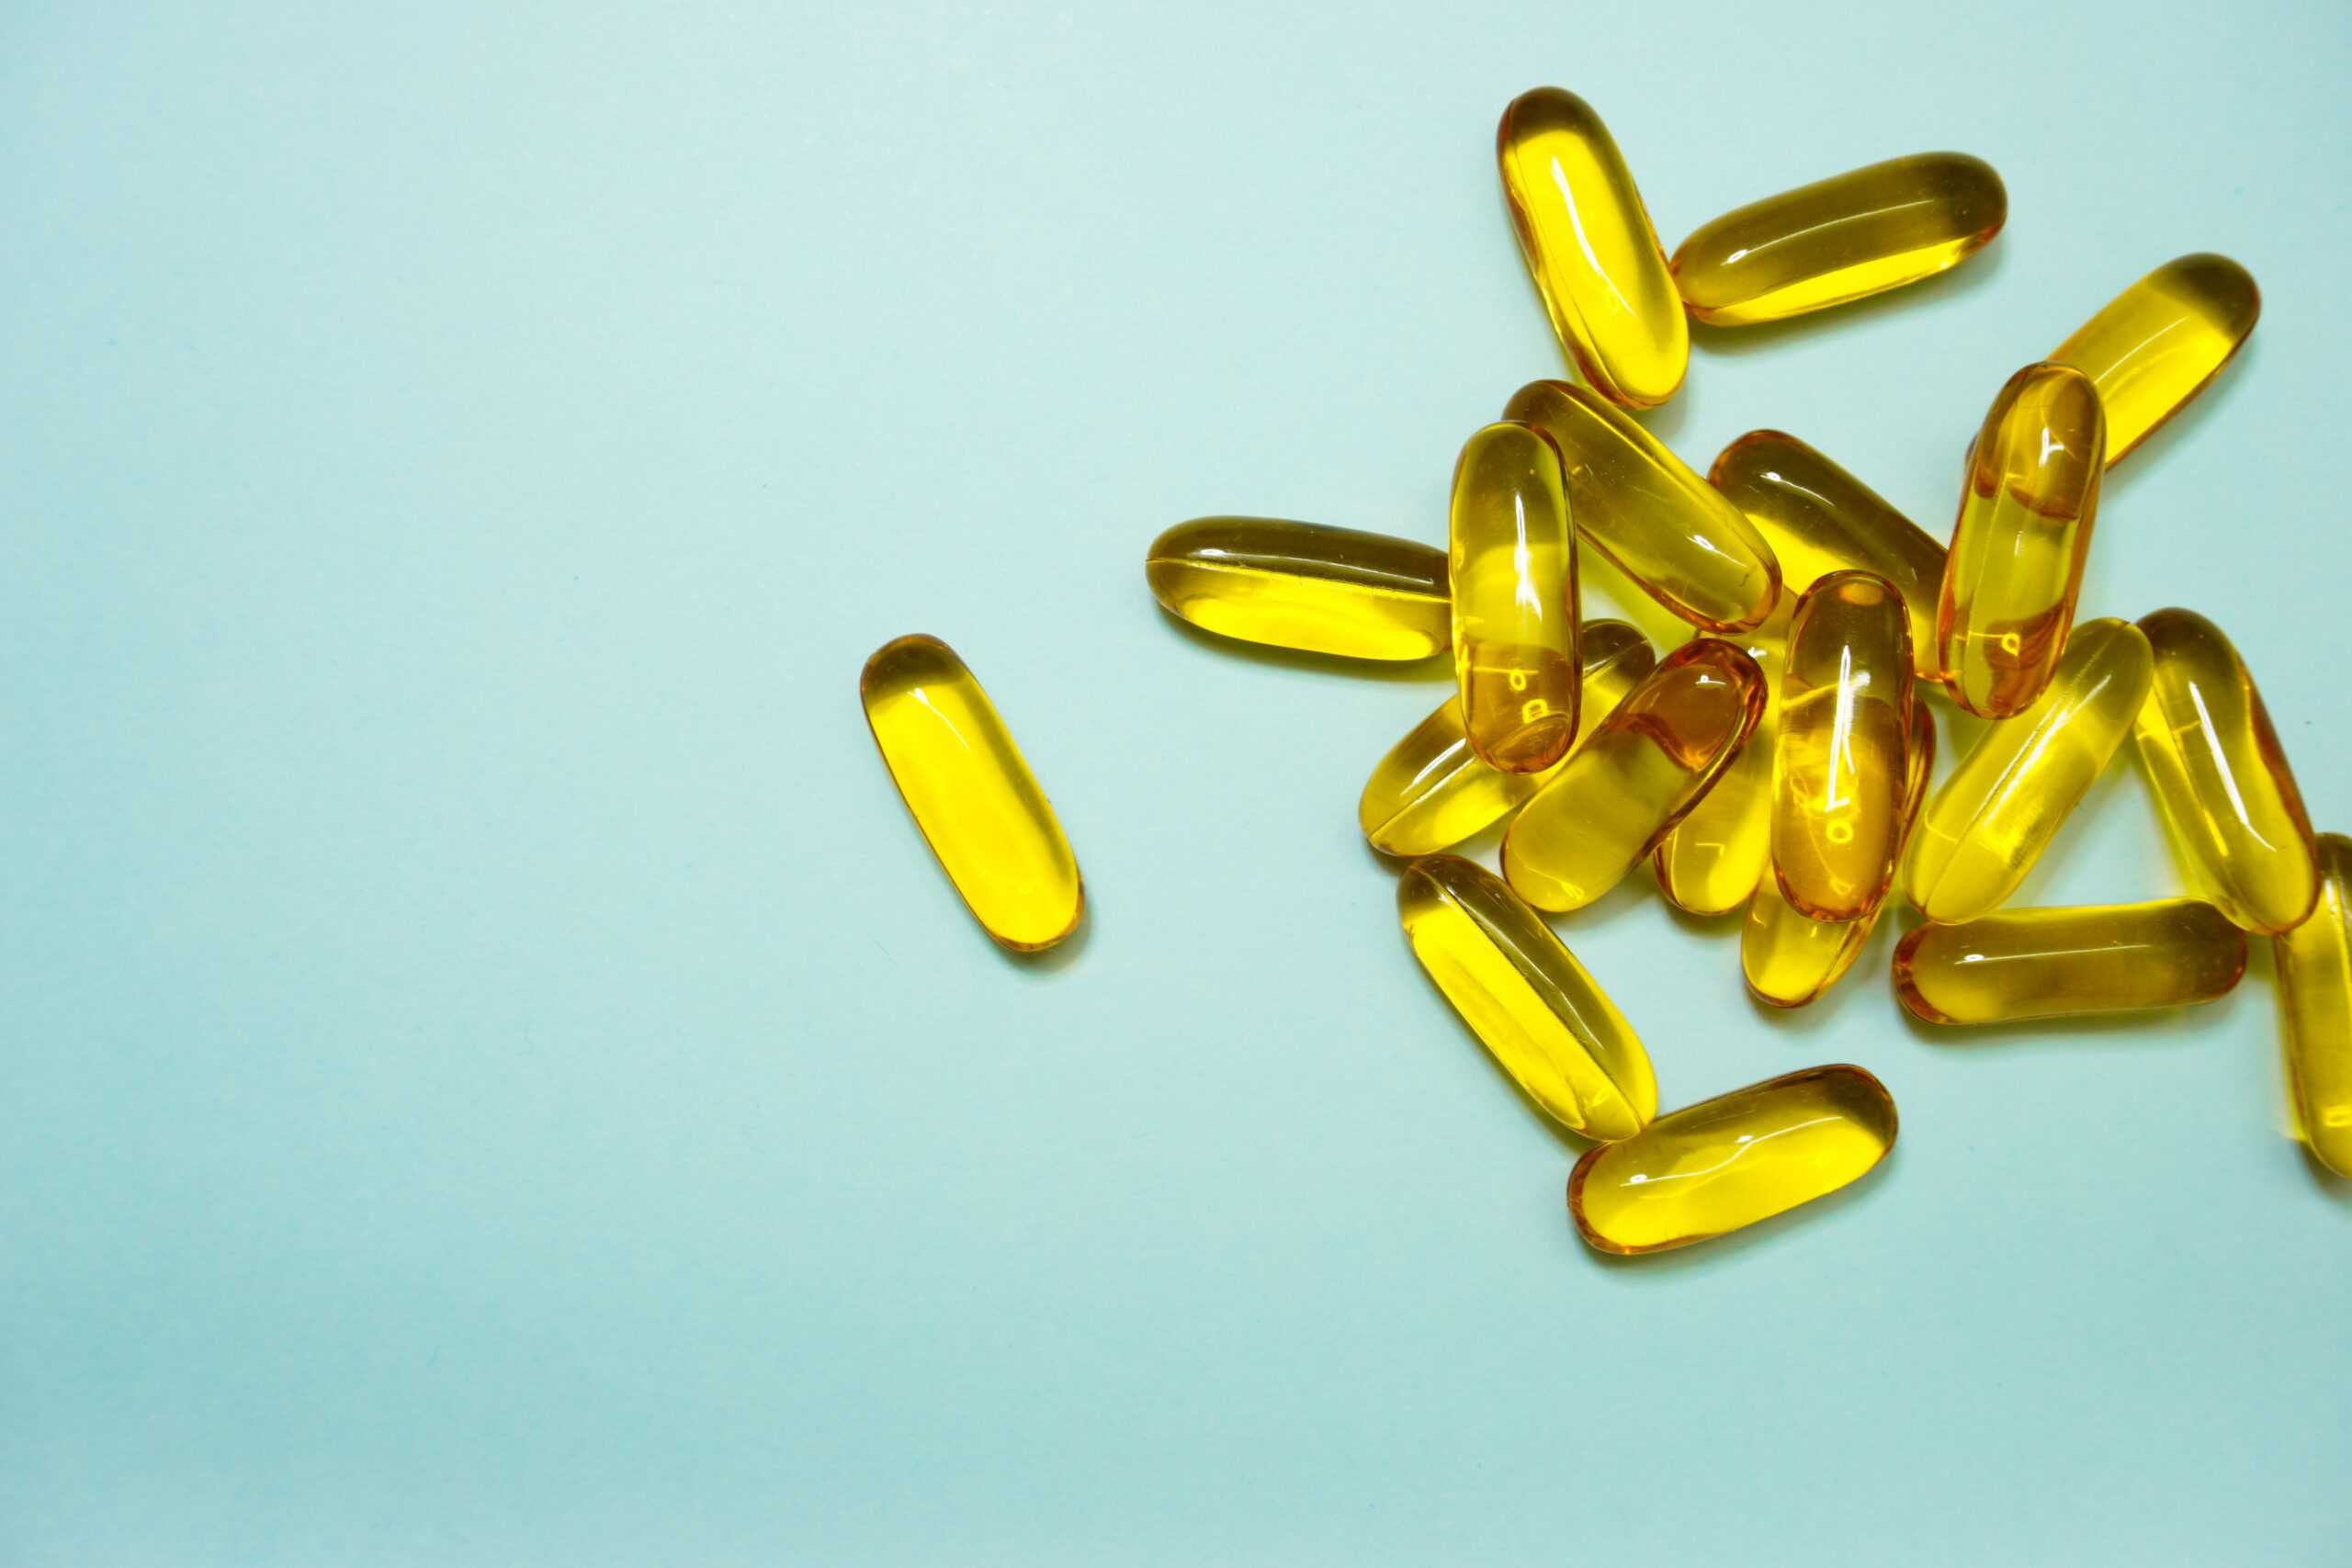 Top 10 Cod Liver Oil Benefits That You Should Know – Credihealth Blog